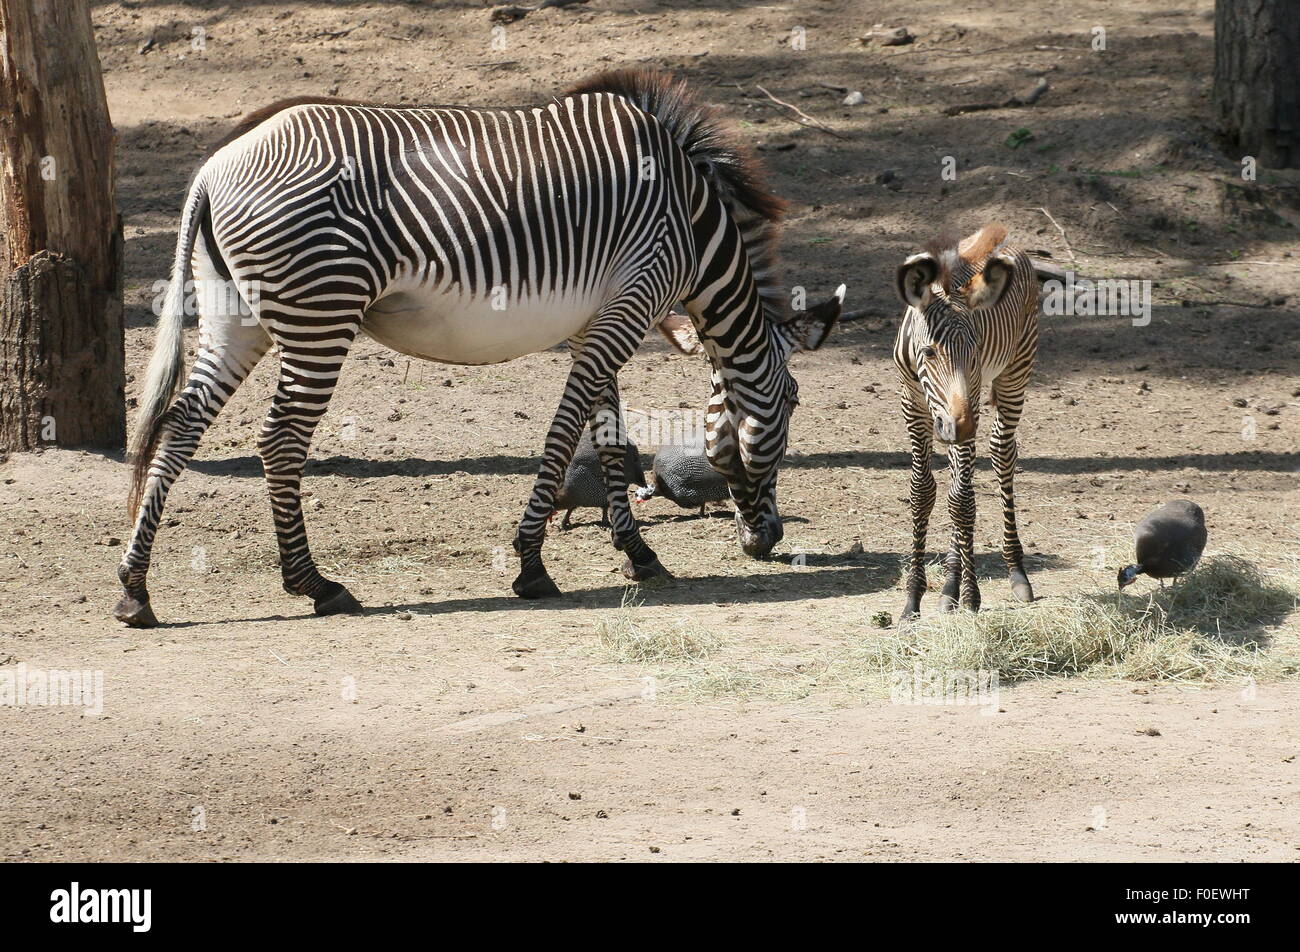 Young East African Grévy's zebra or Imperial zebra foal (Equus grevyi) with his mother Stock Photo